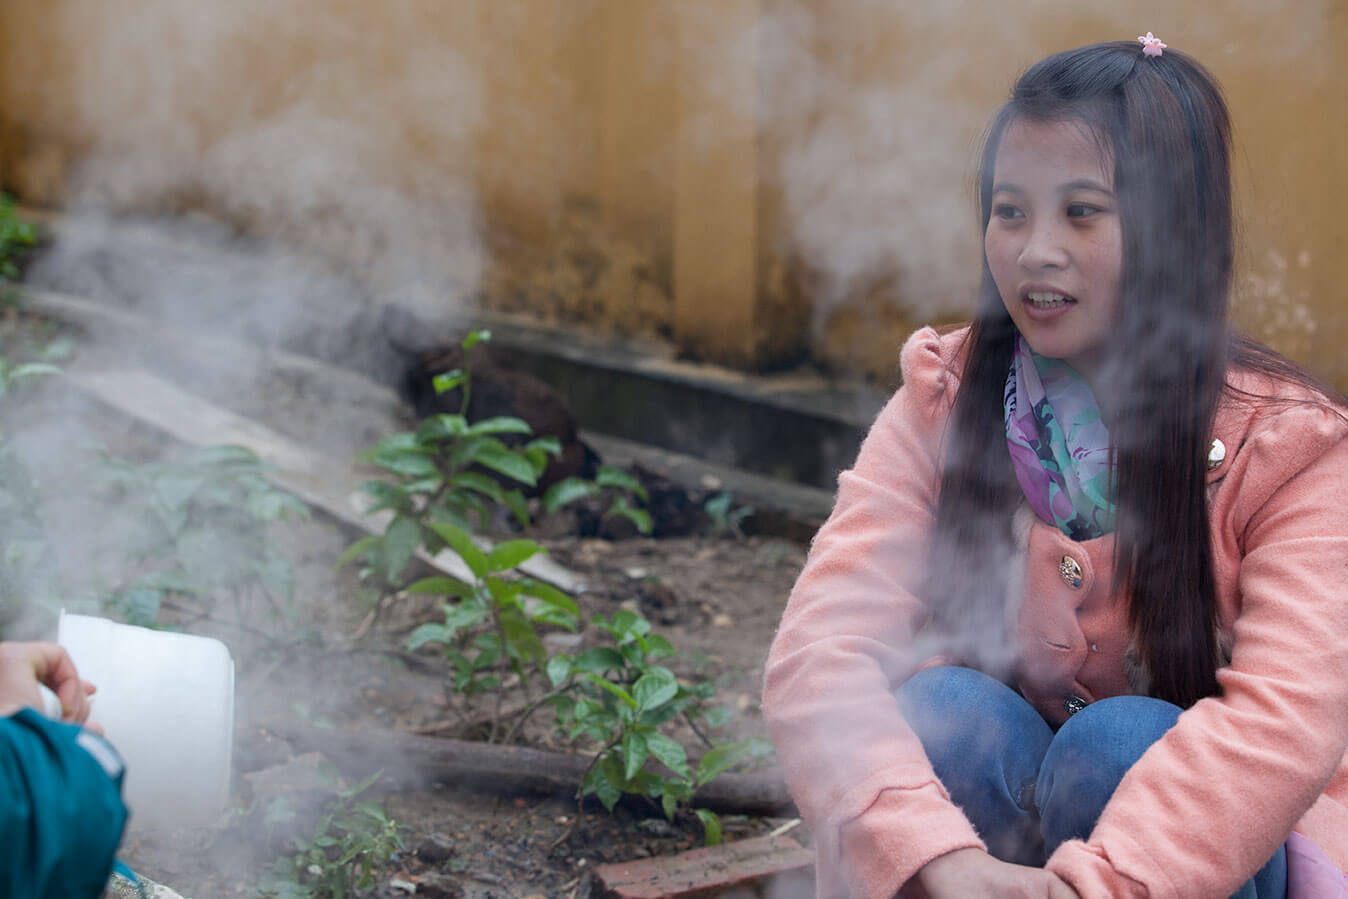 Still from Along the Line. A young girl is sitting on the ground, she is holding her knees with her arms, and is wearing a pink jacket and denim jeans. She is surrounded by smoke.